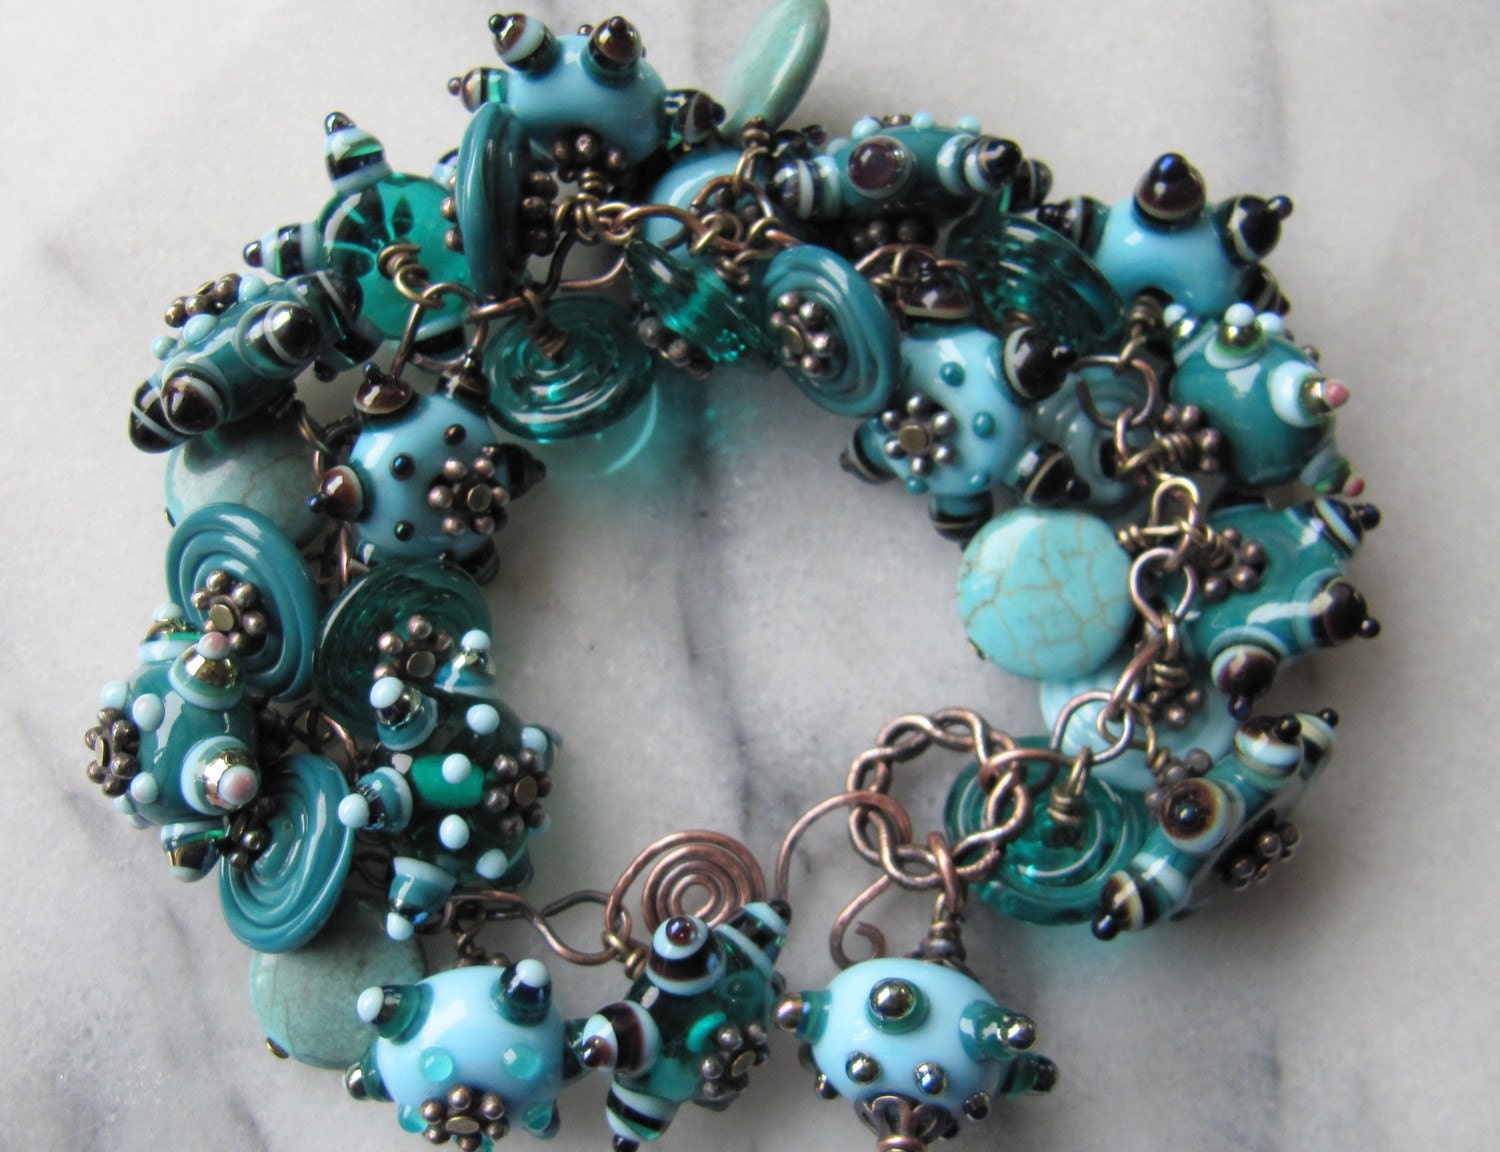 This bracelet contains loads of my handmade lampwork beads and discs, as well as a few pieces of turquoise for good measure.